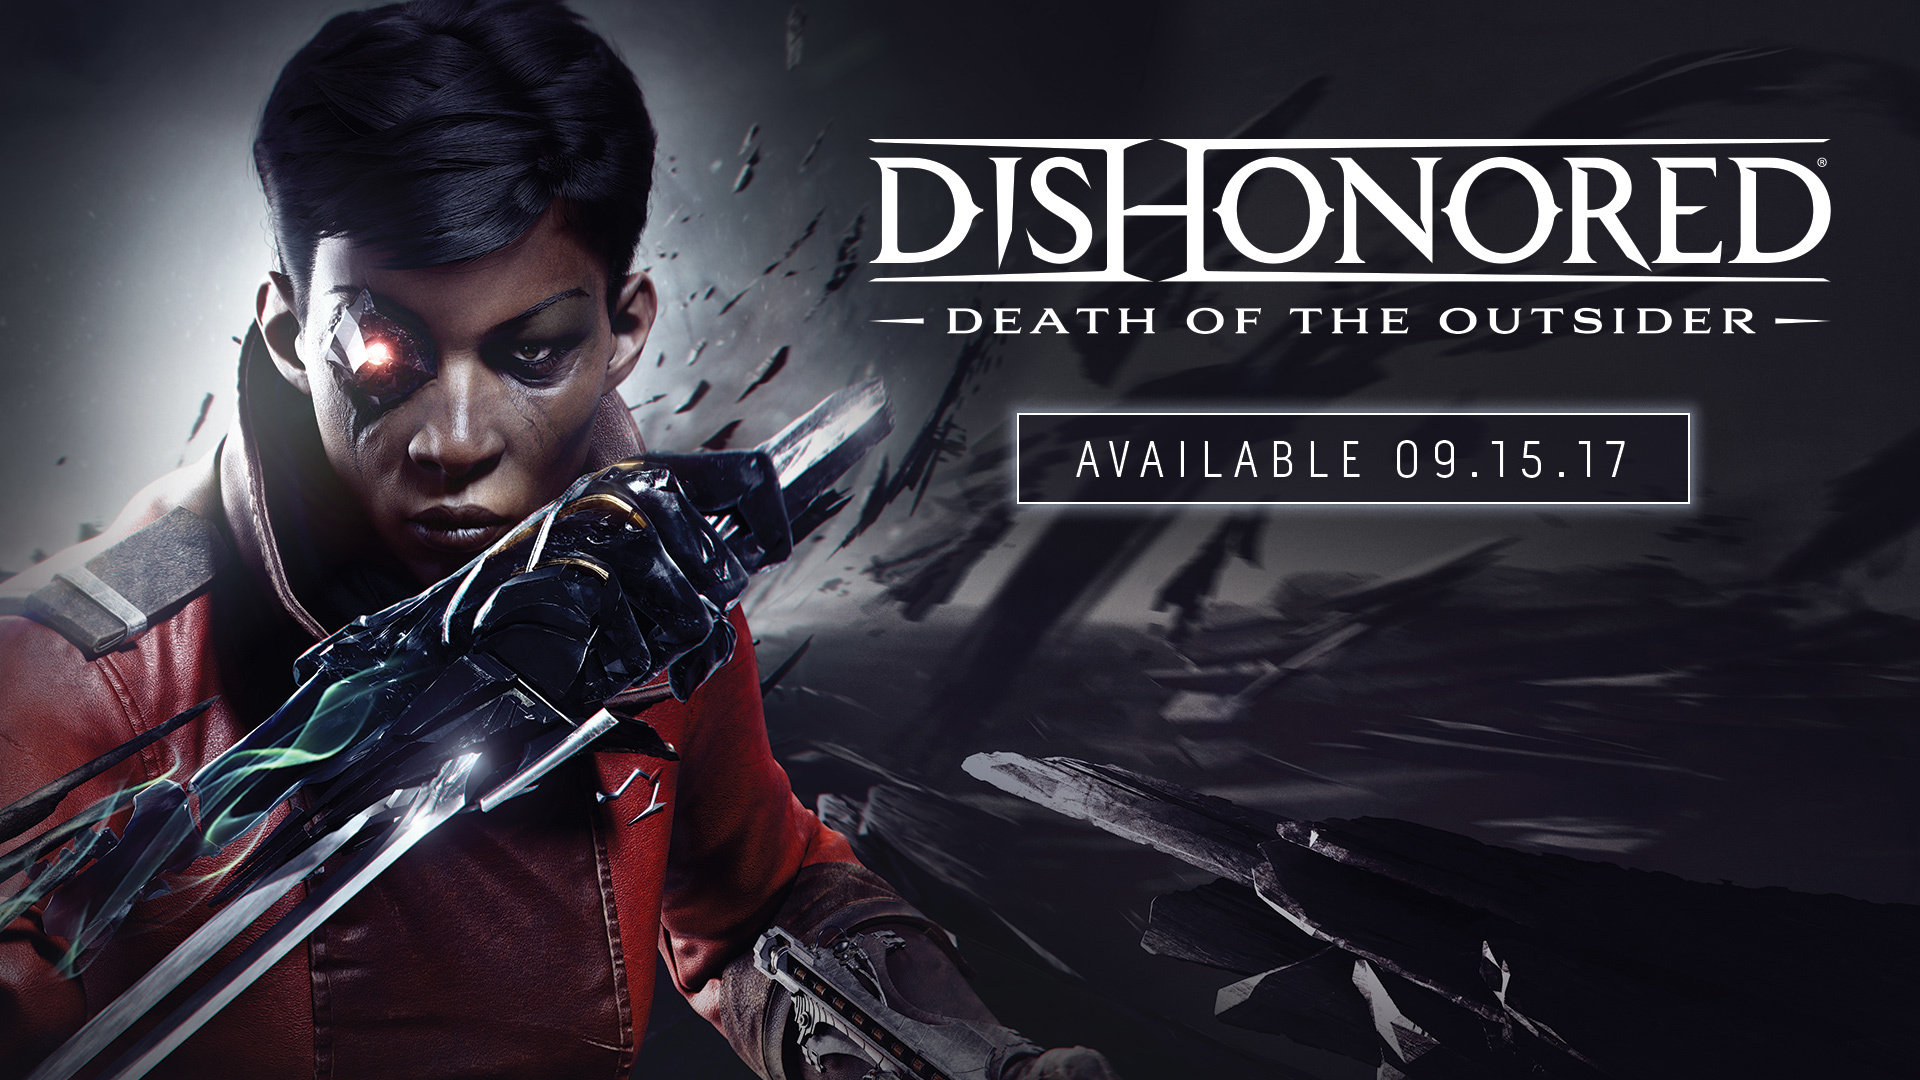 Video Game Dishonored Death Of The Outsider 1920x1080